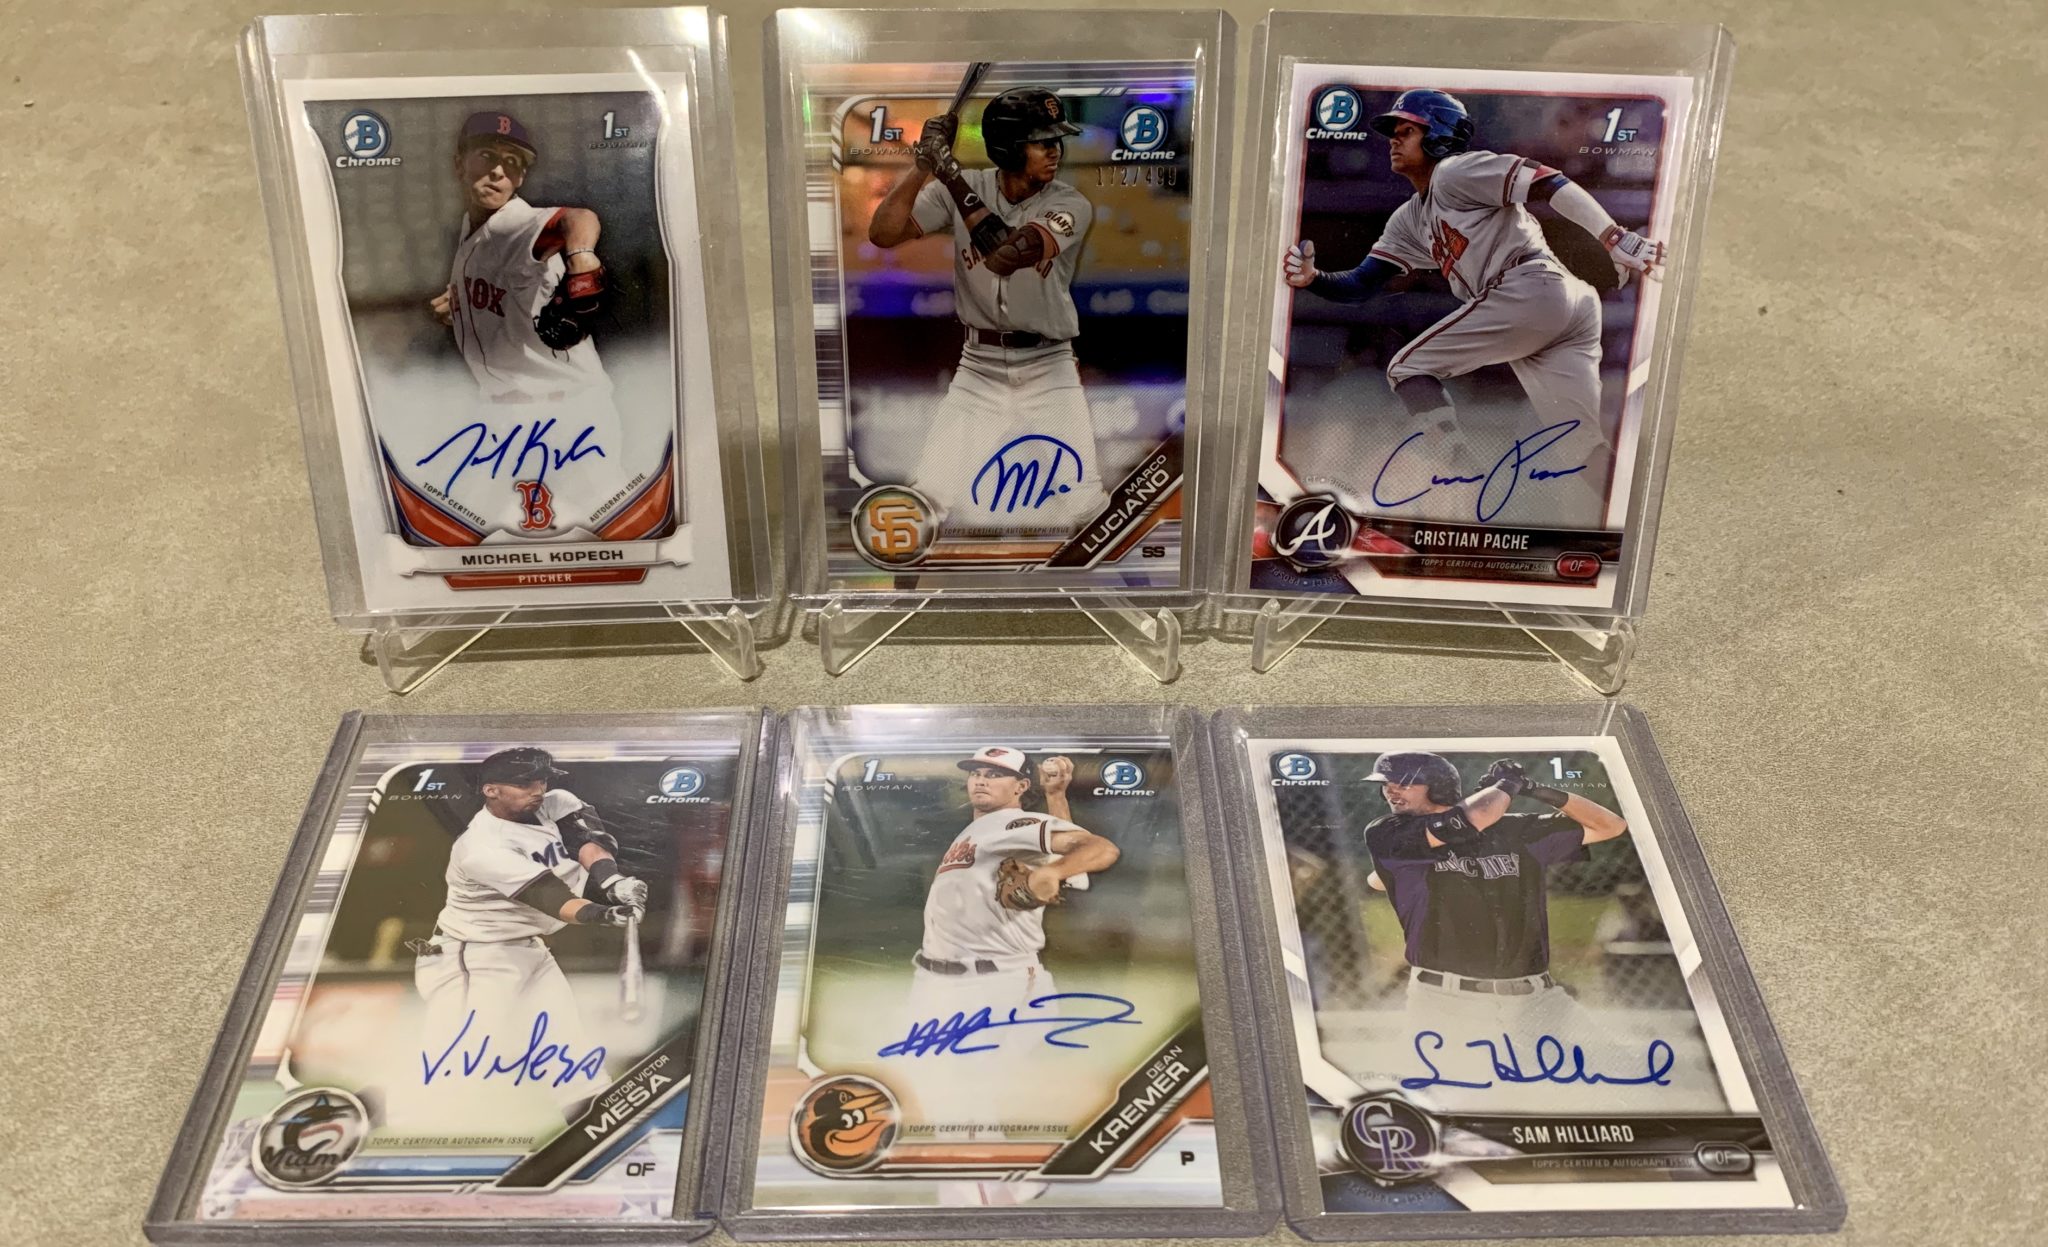 Our Top 25 Prospects and Their Bowman Baseball Cards To Own